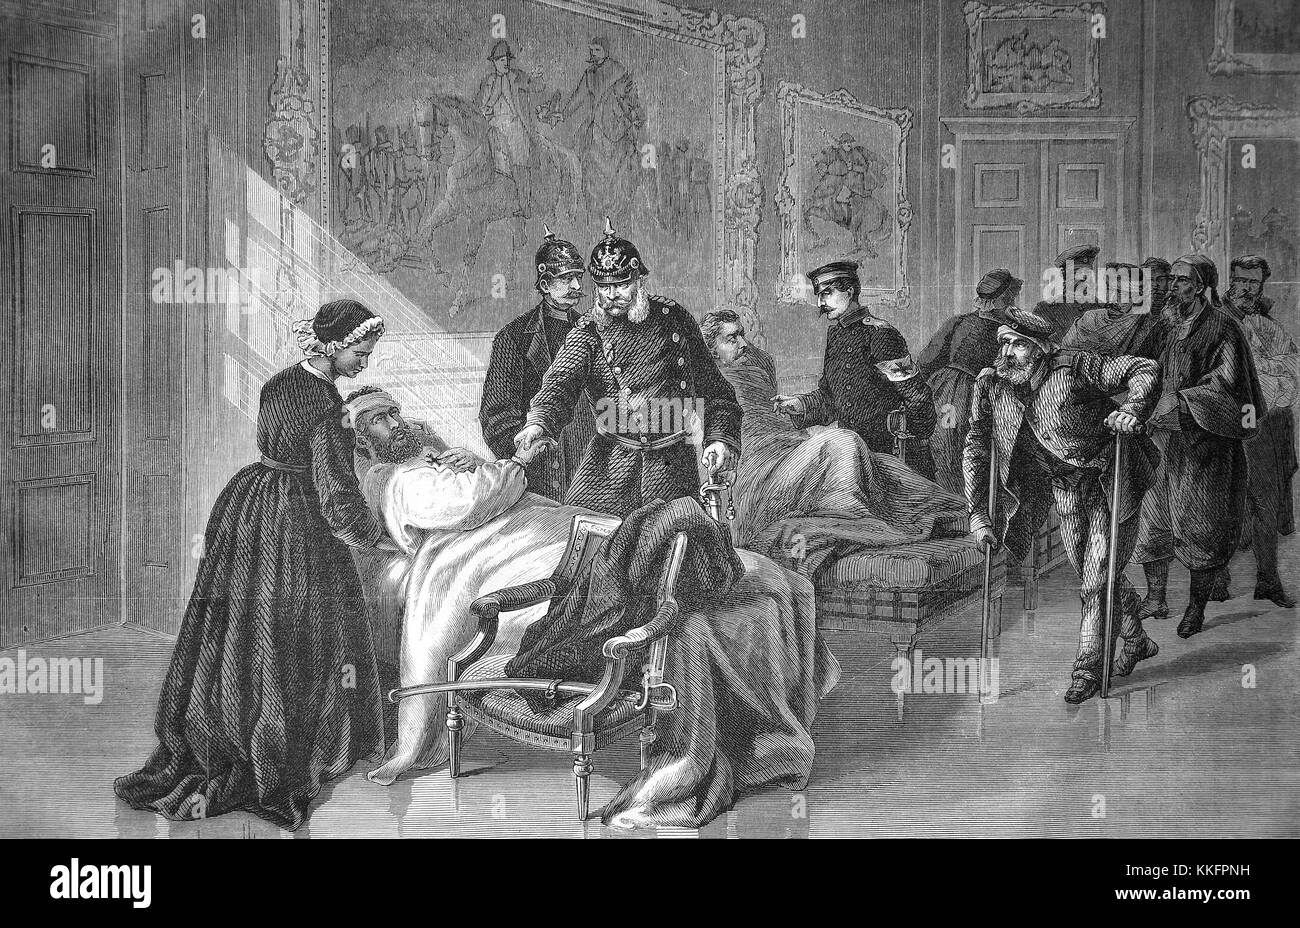 King William I visits the wounded in the military hospital of the Palace of Versailles, France, Franco-German War 1870/71, Franco-Prussian War or Franco-German War, War of 1870, a conflict between the Second French Empire of Napoleon III and the German states of the North German Confederation led by the Kingdom of Prussia, Digital improved reproduction of an original woodcut Stock Photo